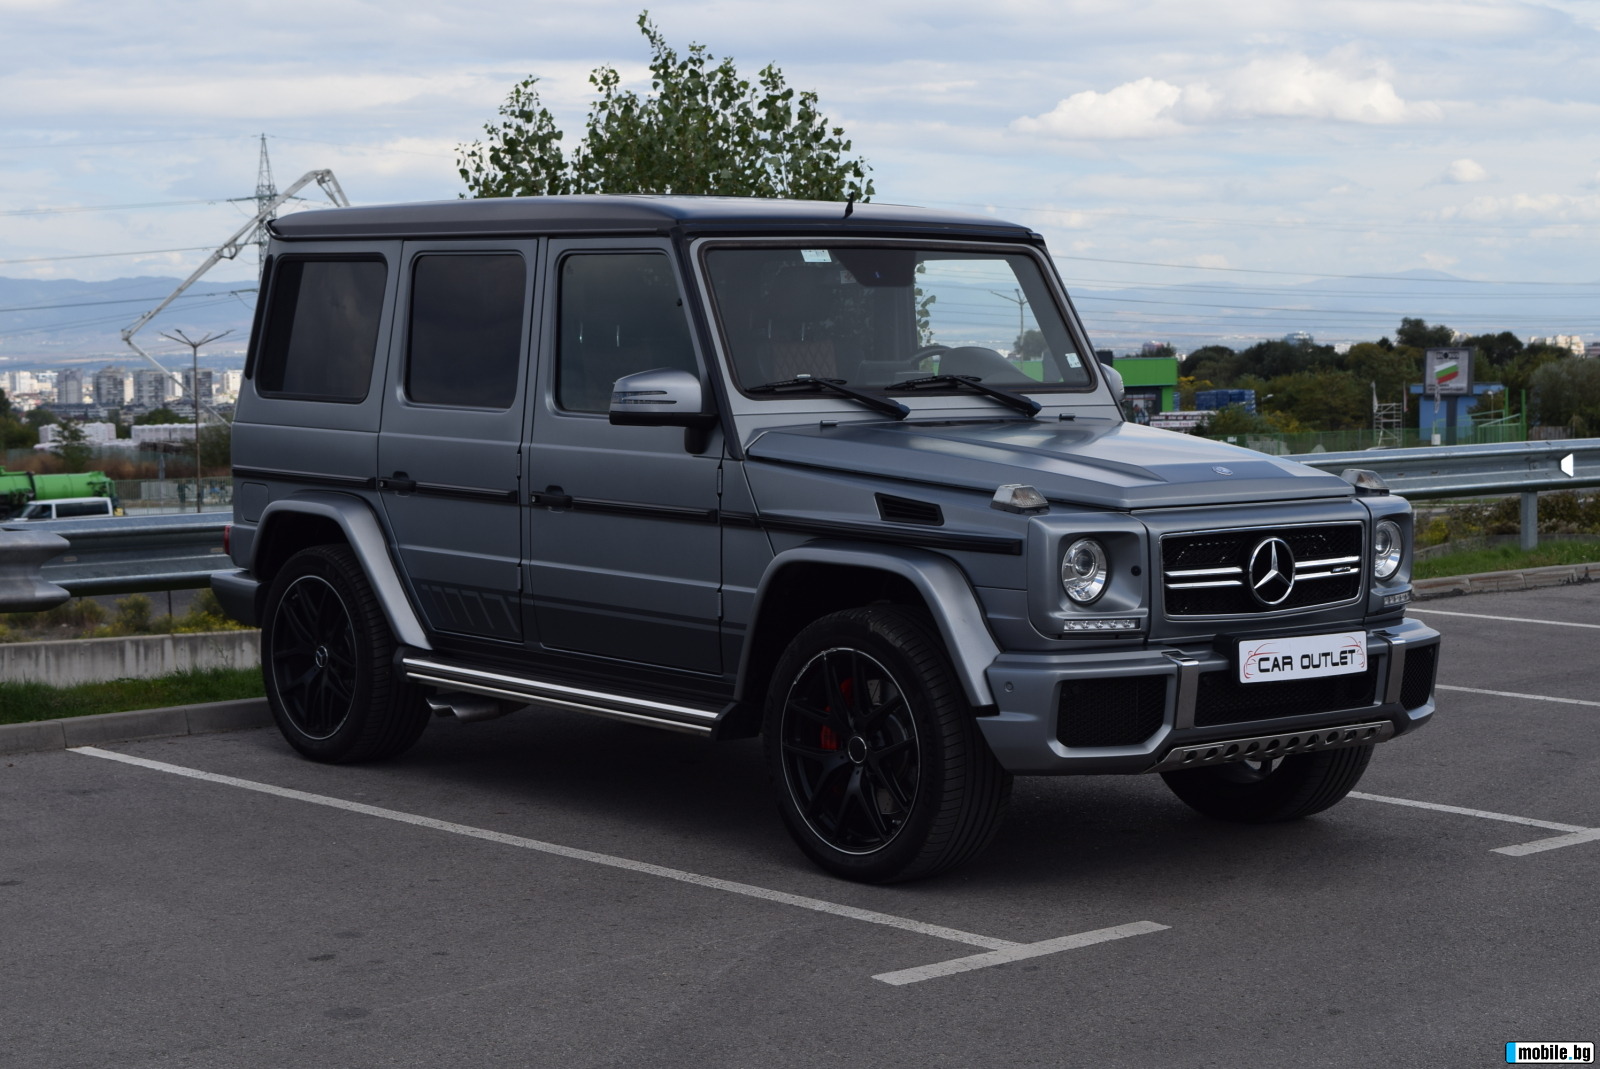 Mercedes-Benz G 63 AMG Exclusive Edition | Mobile.bg   2